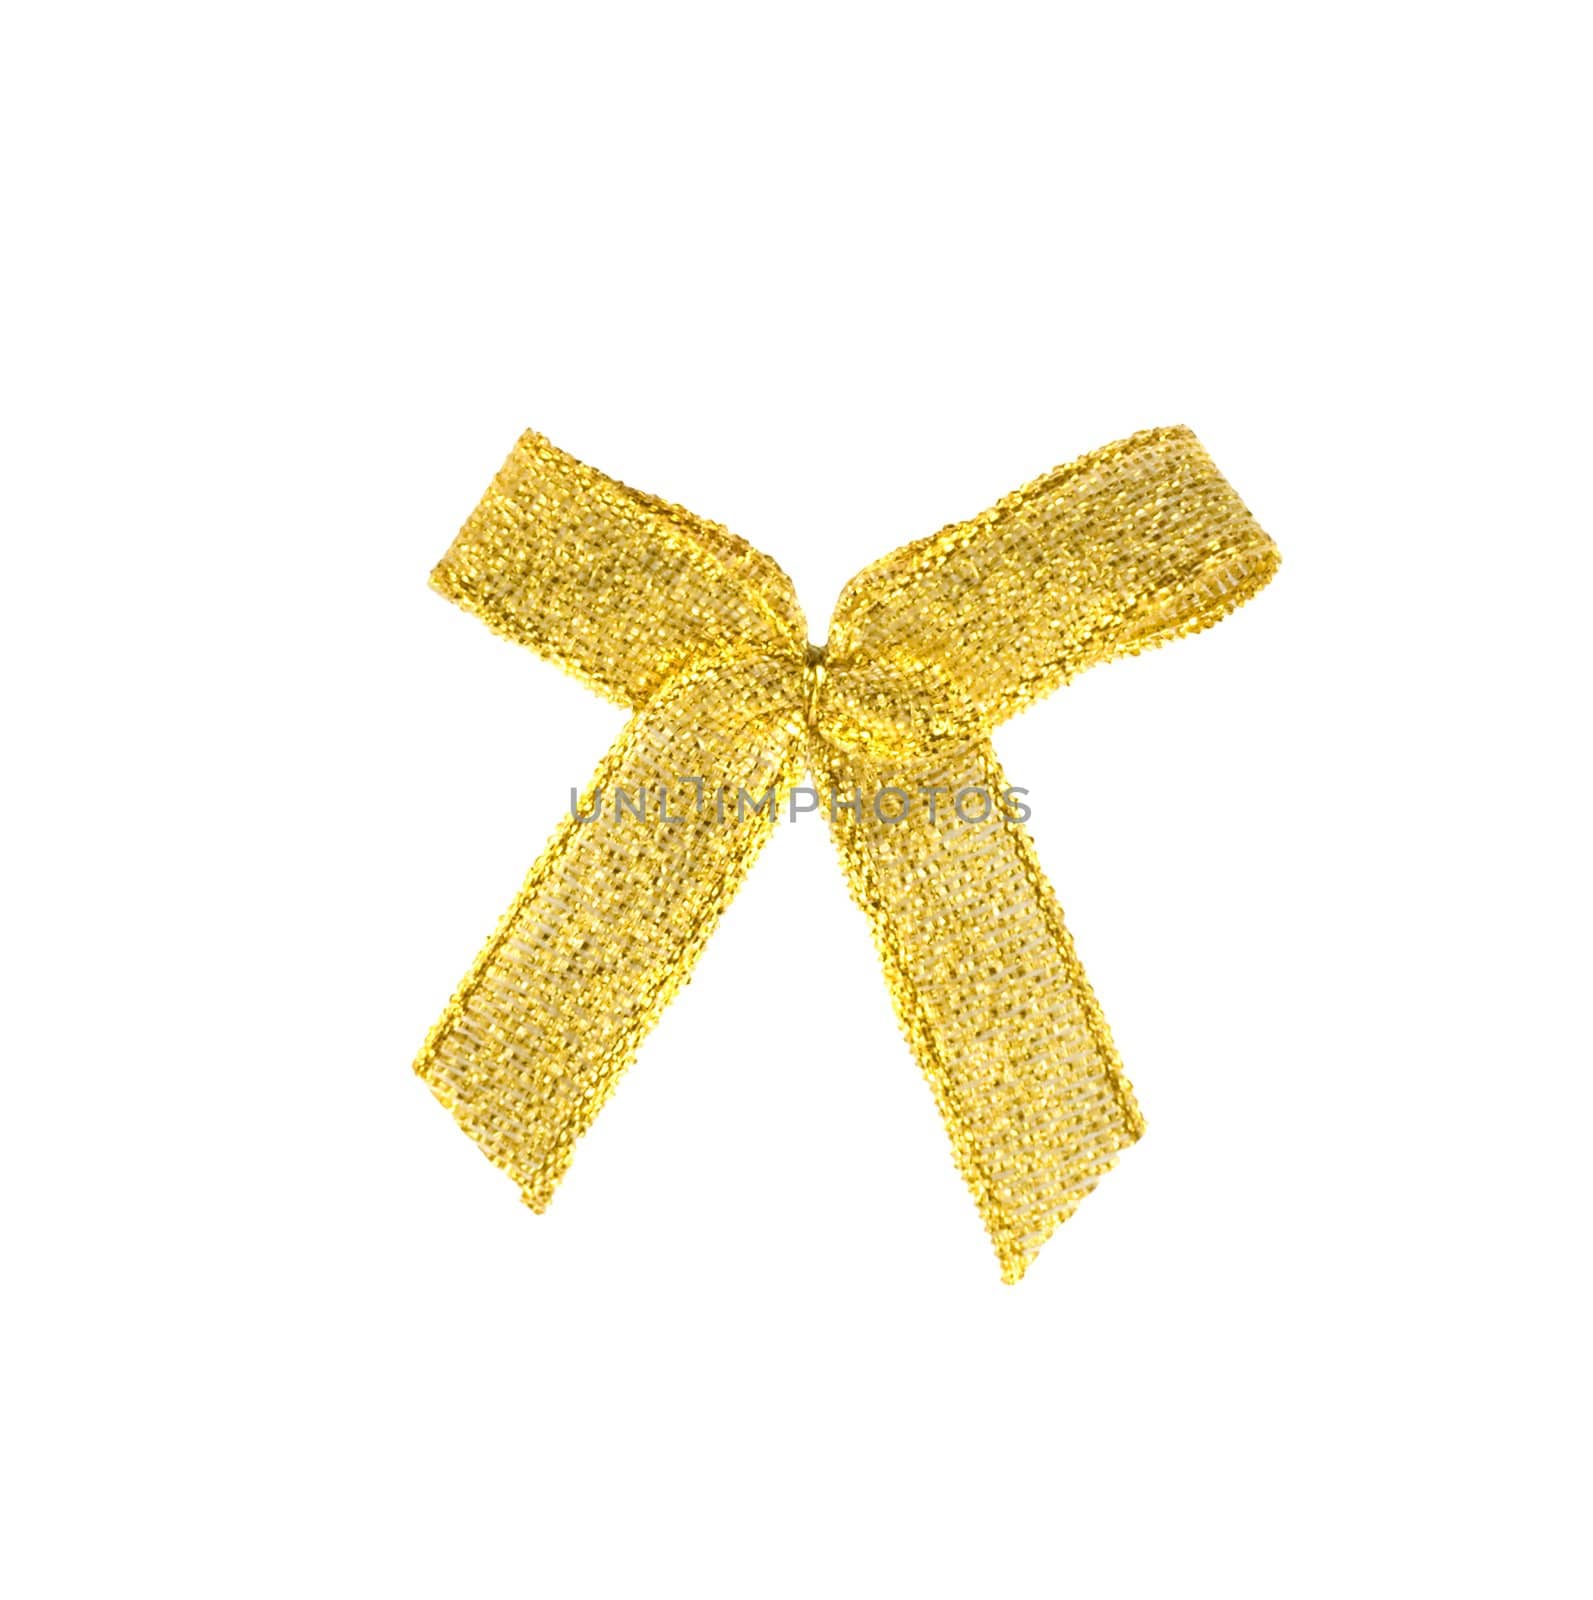 golden bow isolated on white background,to be used in placing on top of items - gifts, products, etc.